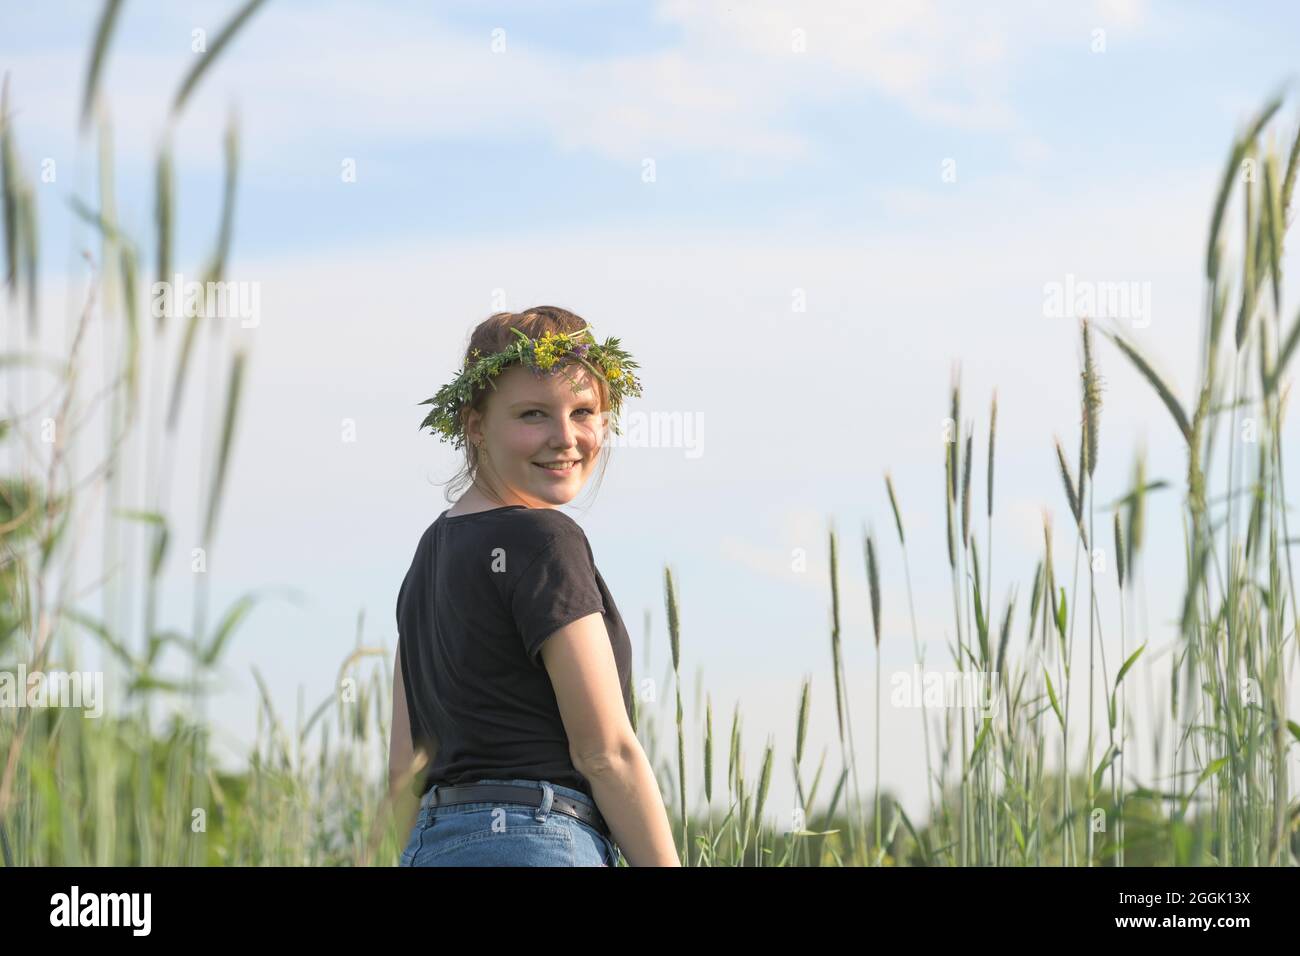 Young woman with a wreath of natural flowers on her head runs lively between cereal plants Stock Photo